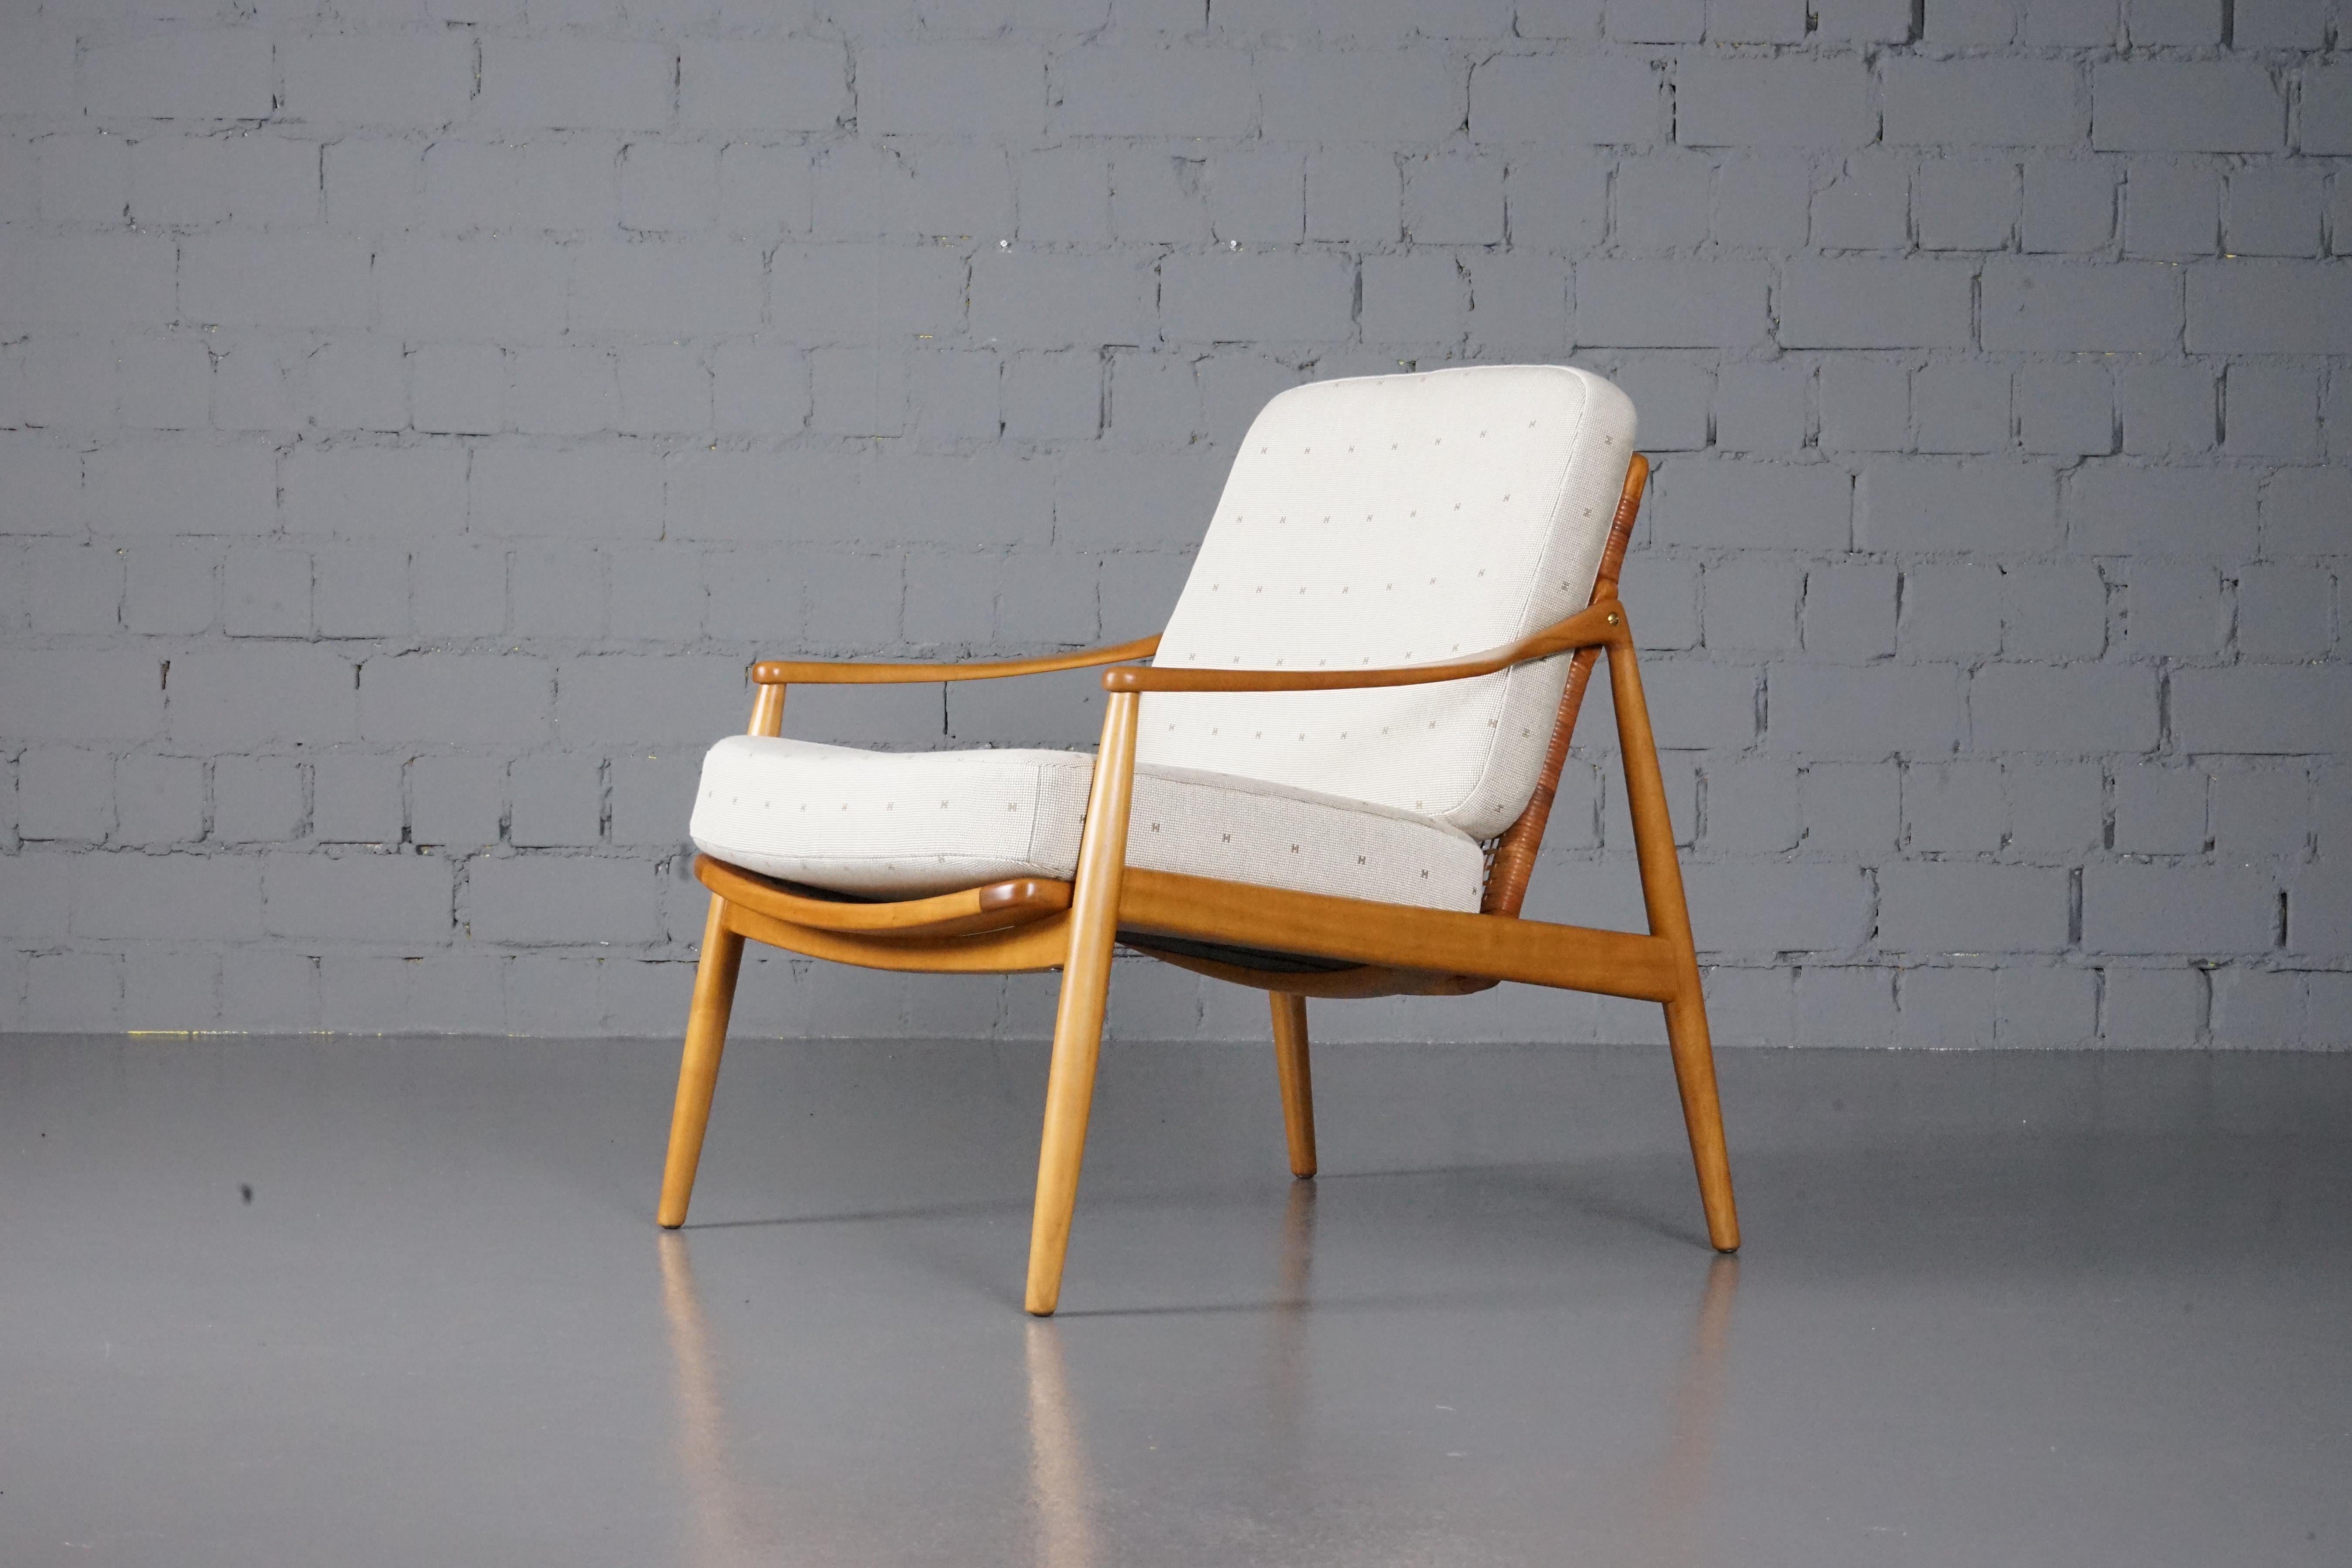 Mid-20th Century Lounge Chair in Hermès Upholstery by Hartmut Lohmeyer for Wilkhahn, 1950s For Sale